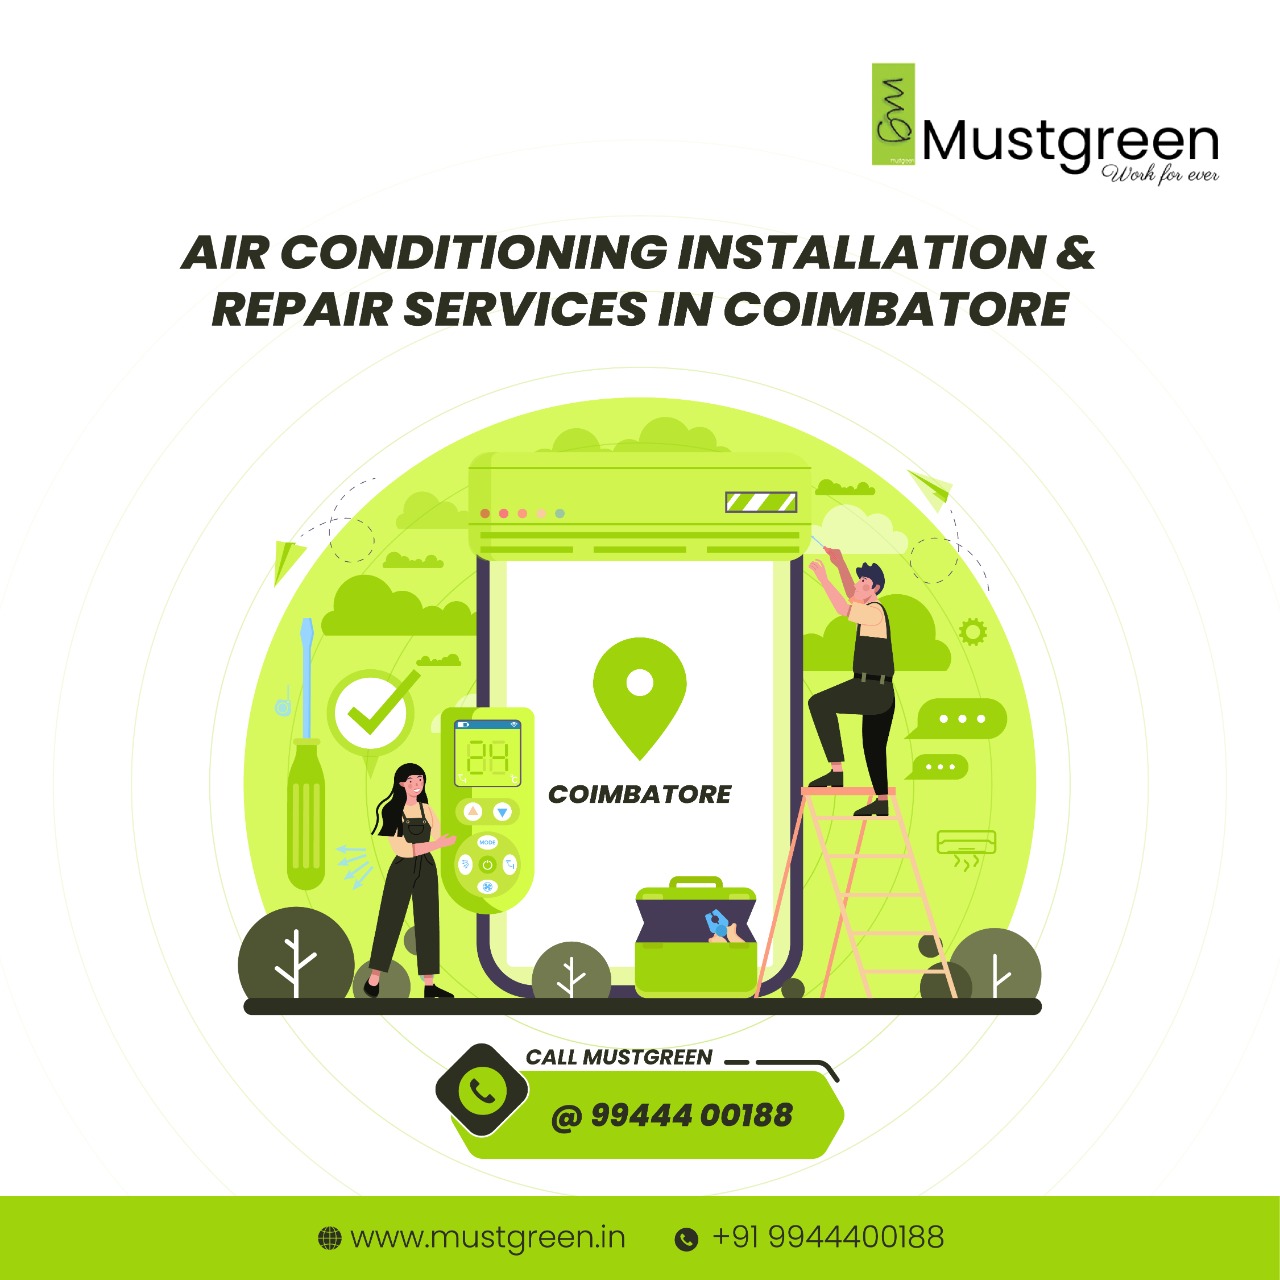 Air-Conditioning-Installation-&-Repair-Services-in-Coimbatore